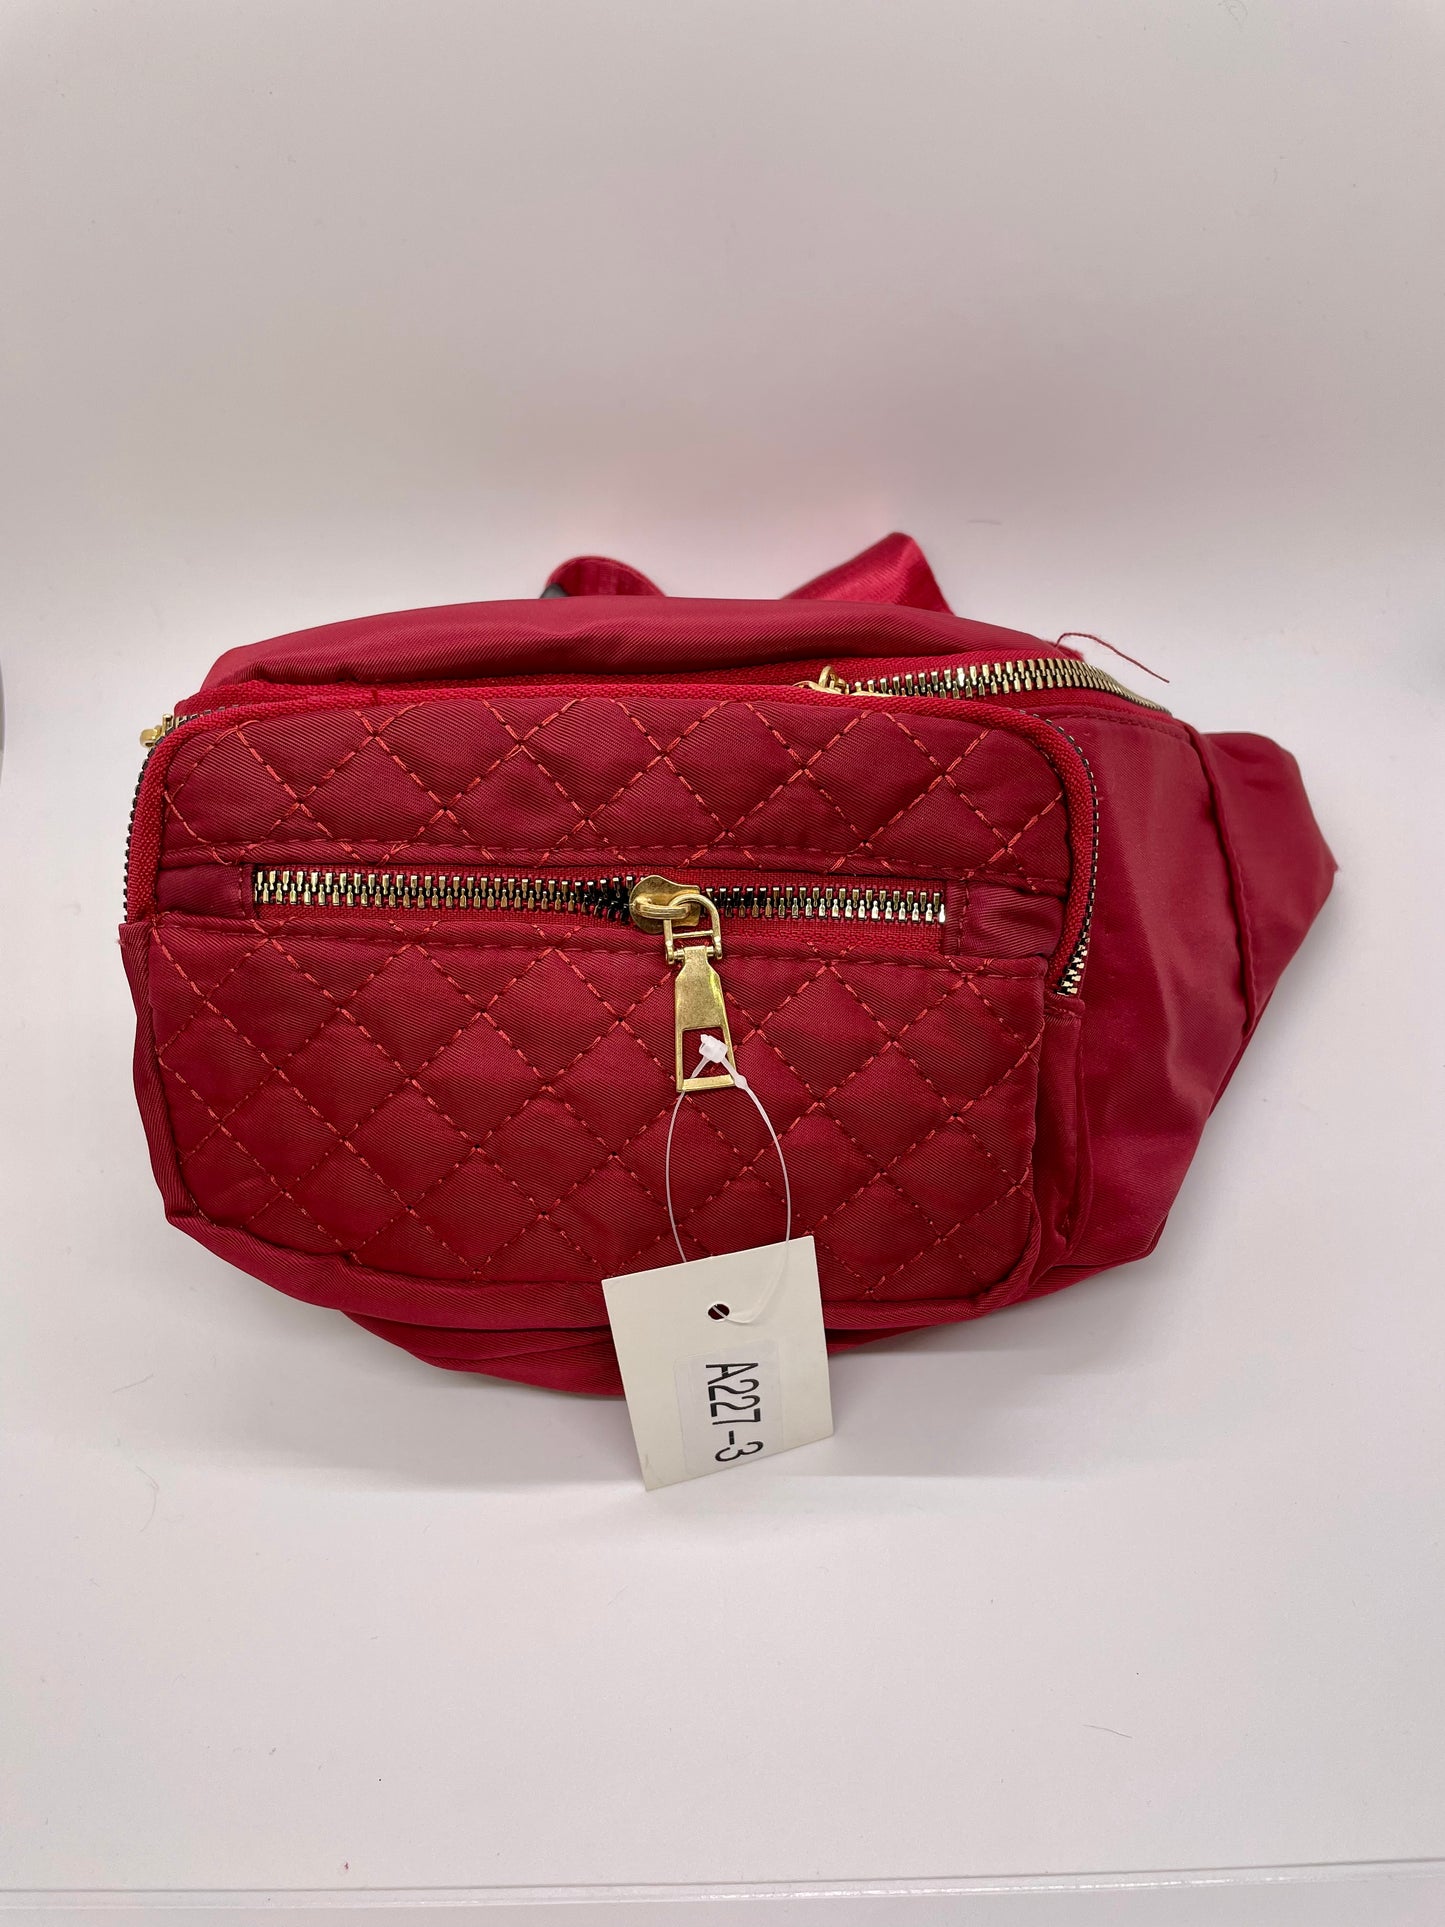 Red fanny pack with a quilted texture and a buckle closure